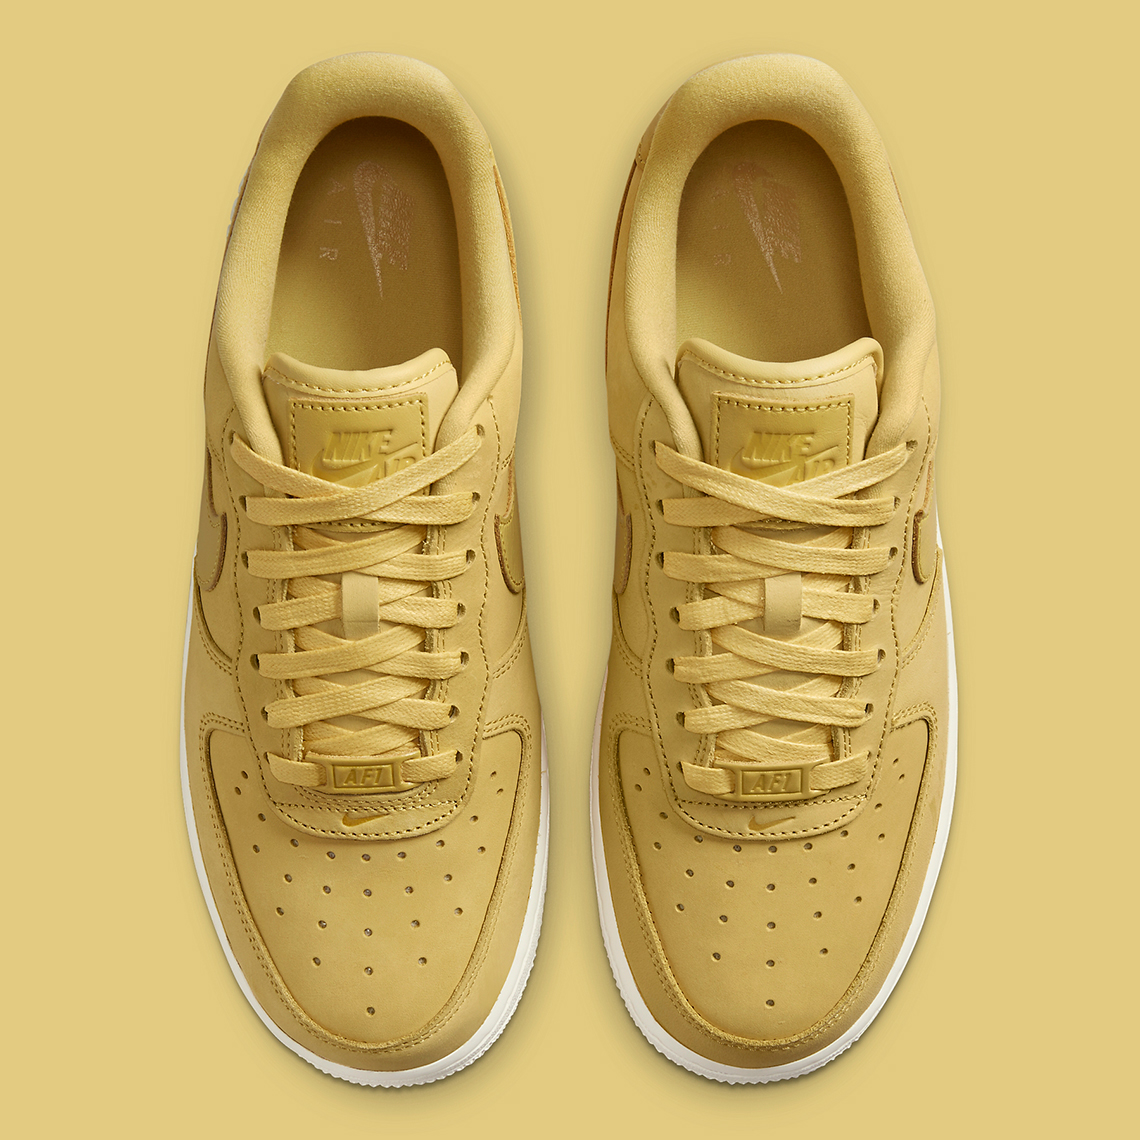 Nike Air Force 1 Low Gold Nubuck Dr9503 700 3